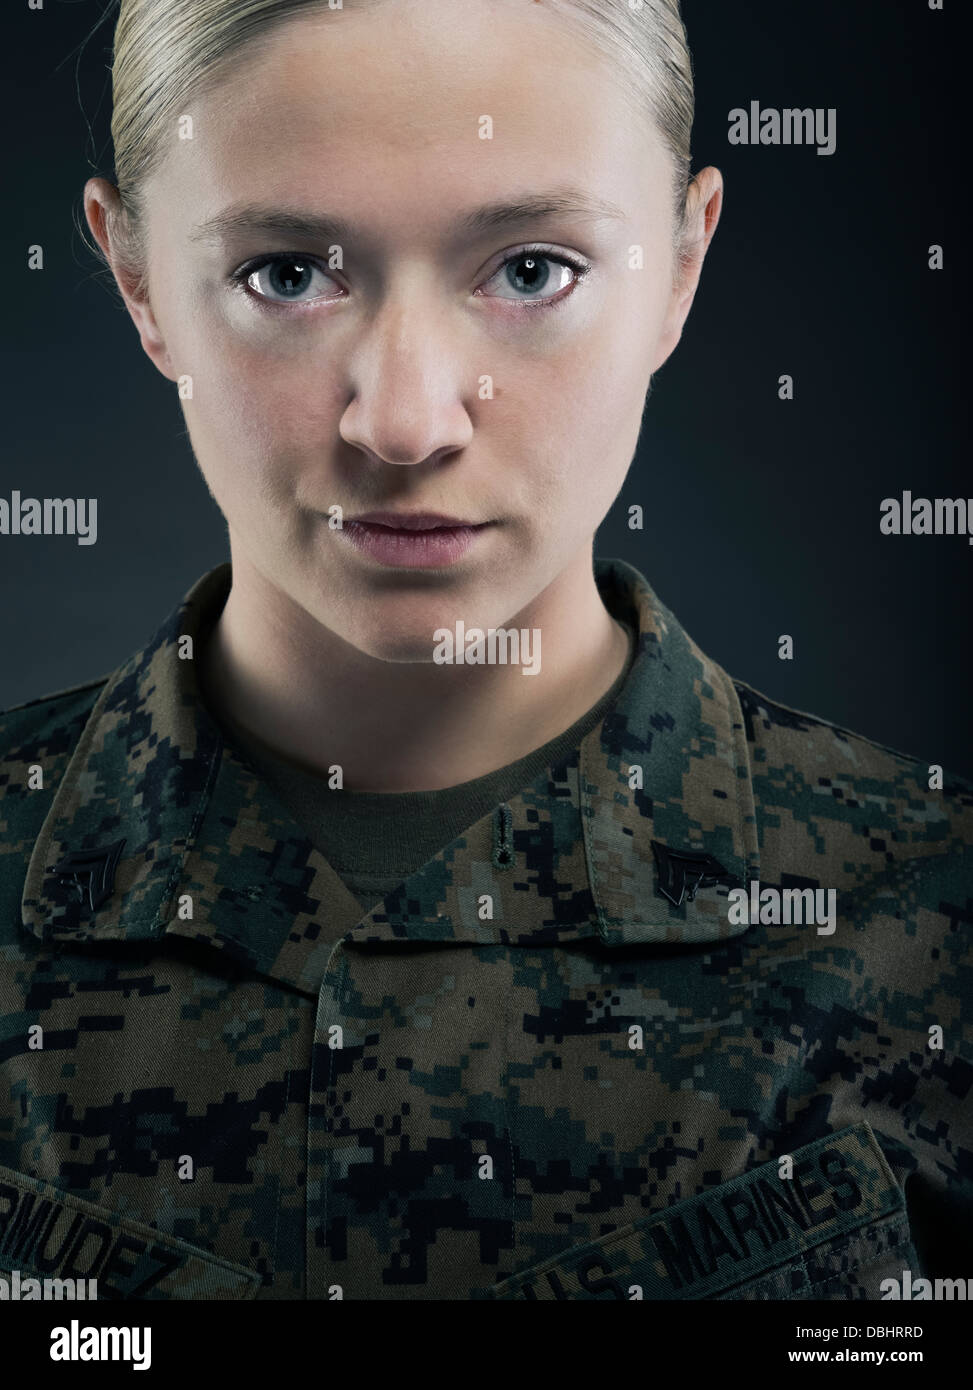 Portrait of Female United States Marine Corps Soldier in utility uniform MARPAT pixelated camouflage Stock Photo